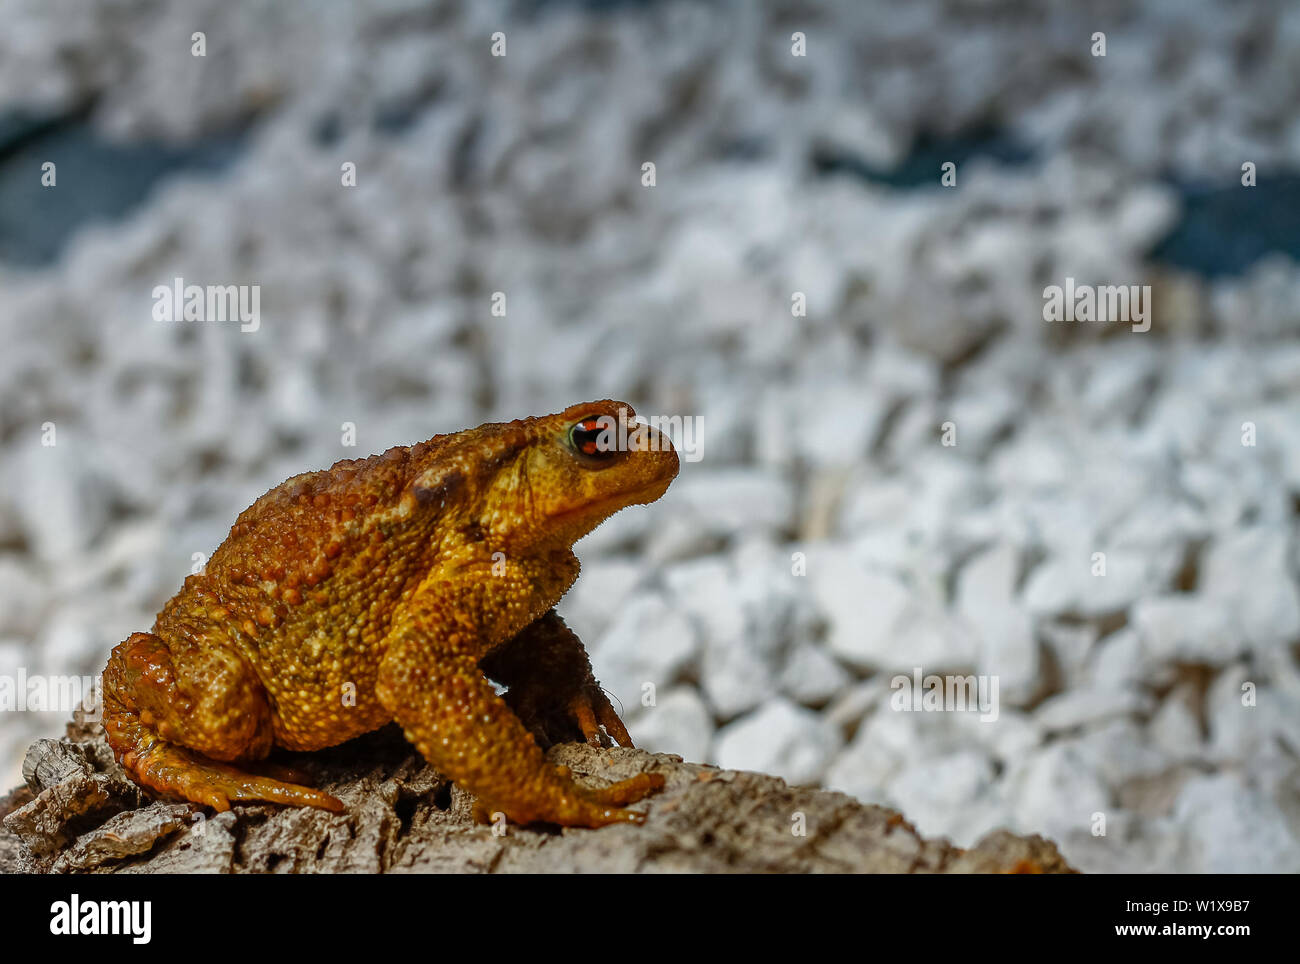 Common toad in front of white background Stock Photo